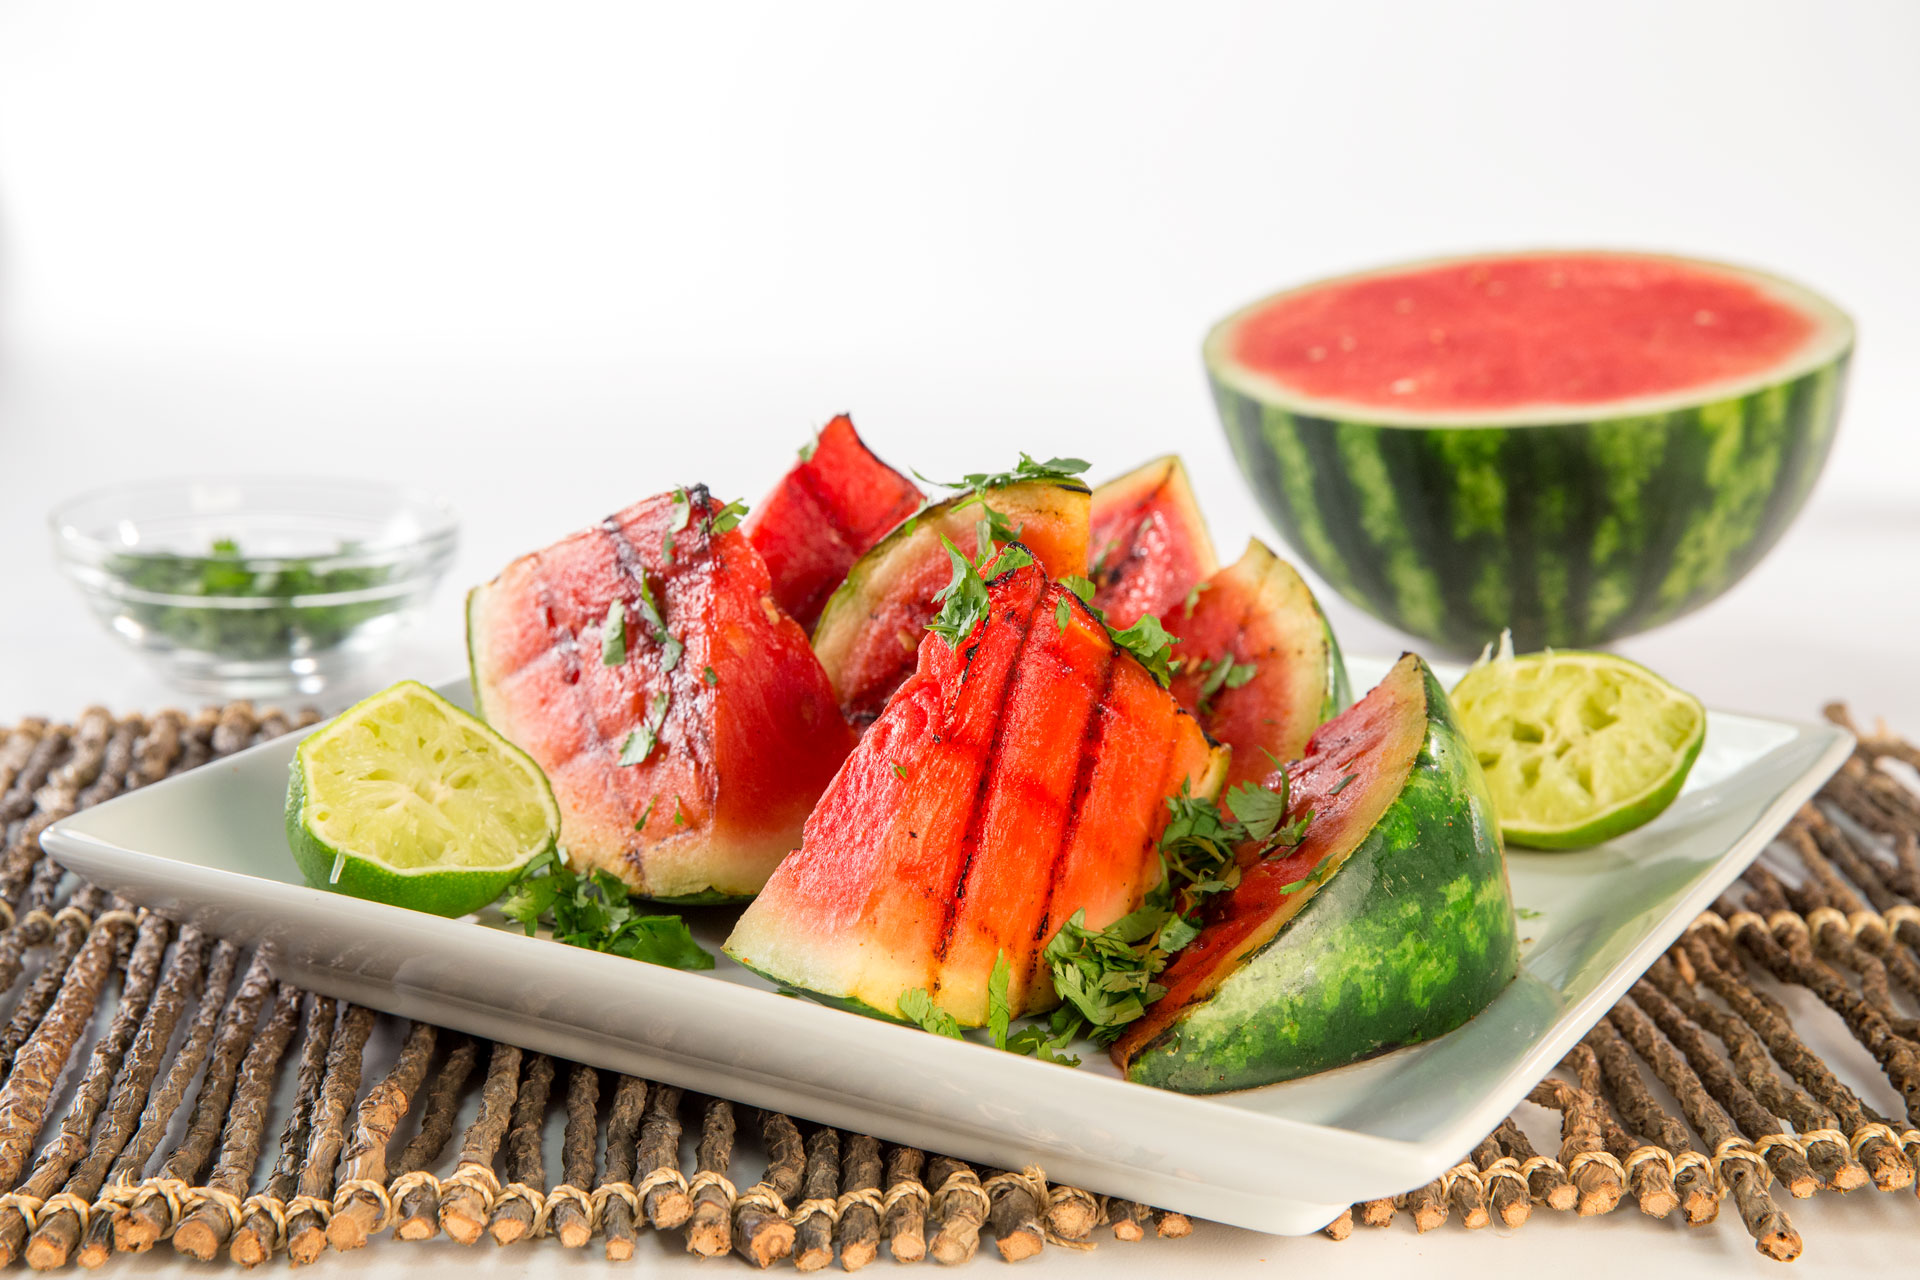 Watermelon is one of our favorite summer indulgences. But is it a fruit or a vegetable. Can it be both? AARP recently published some interesting facts on our favored summer friend - providing the perfect excuse to educate, and follow with some delish recipes featuring watermelon - fruit or vegetable!